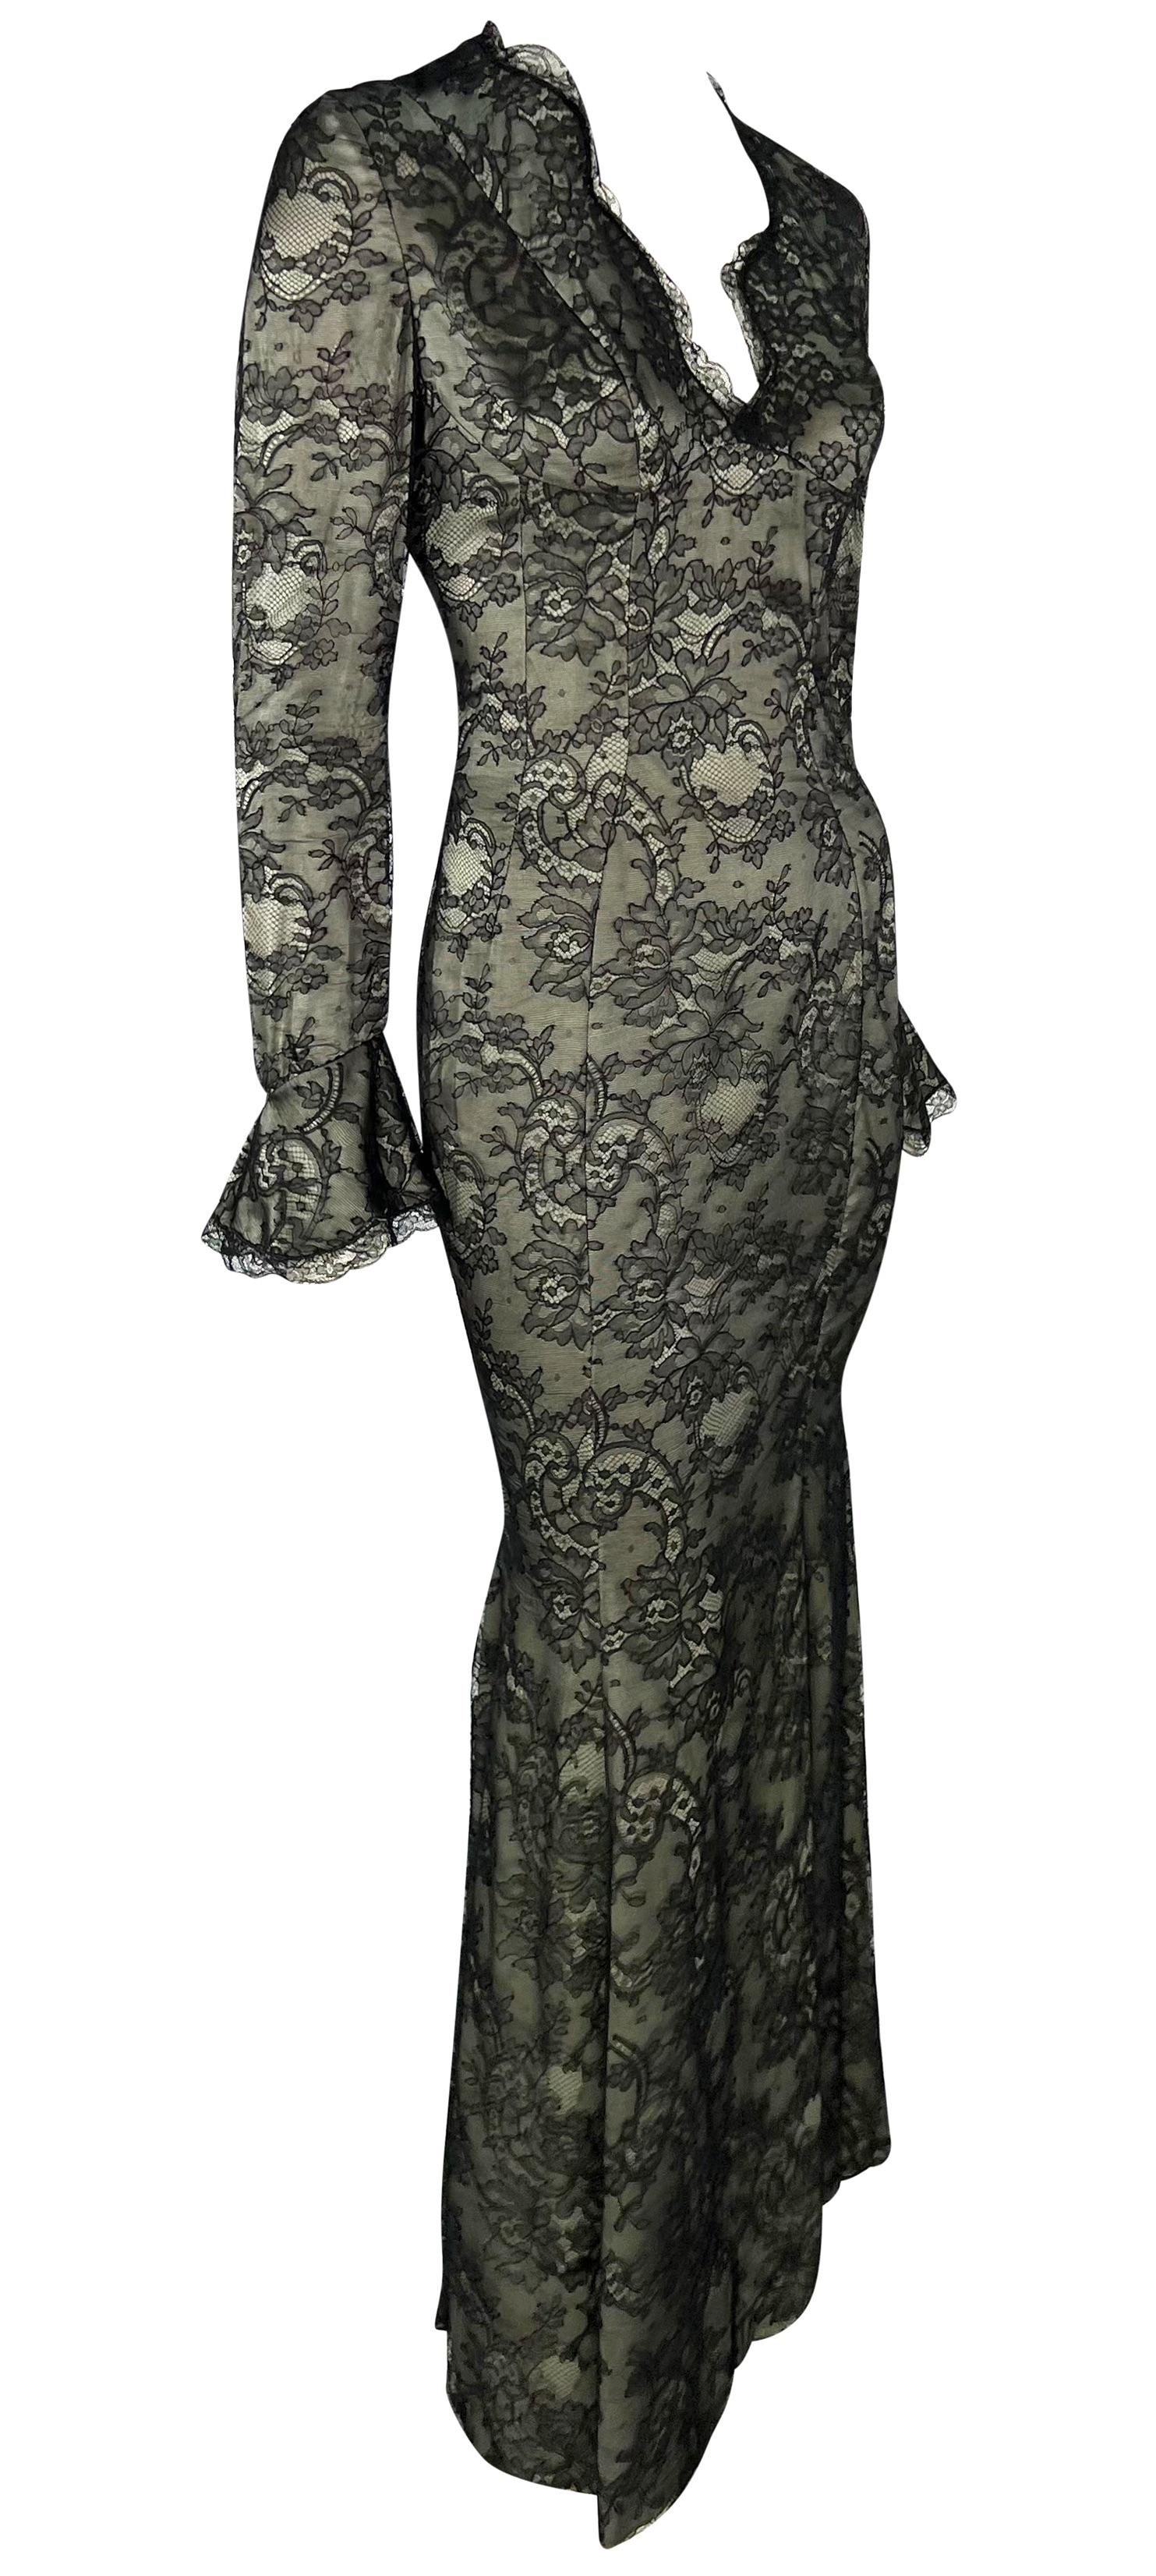 S/S 1995 Thierry Mugler Plunging Taupe Satin Black Floral Lace Overlay Gown For Sale 2